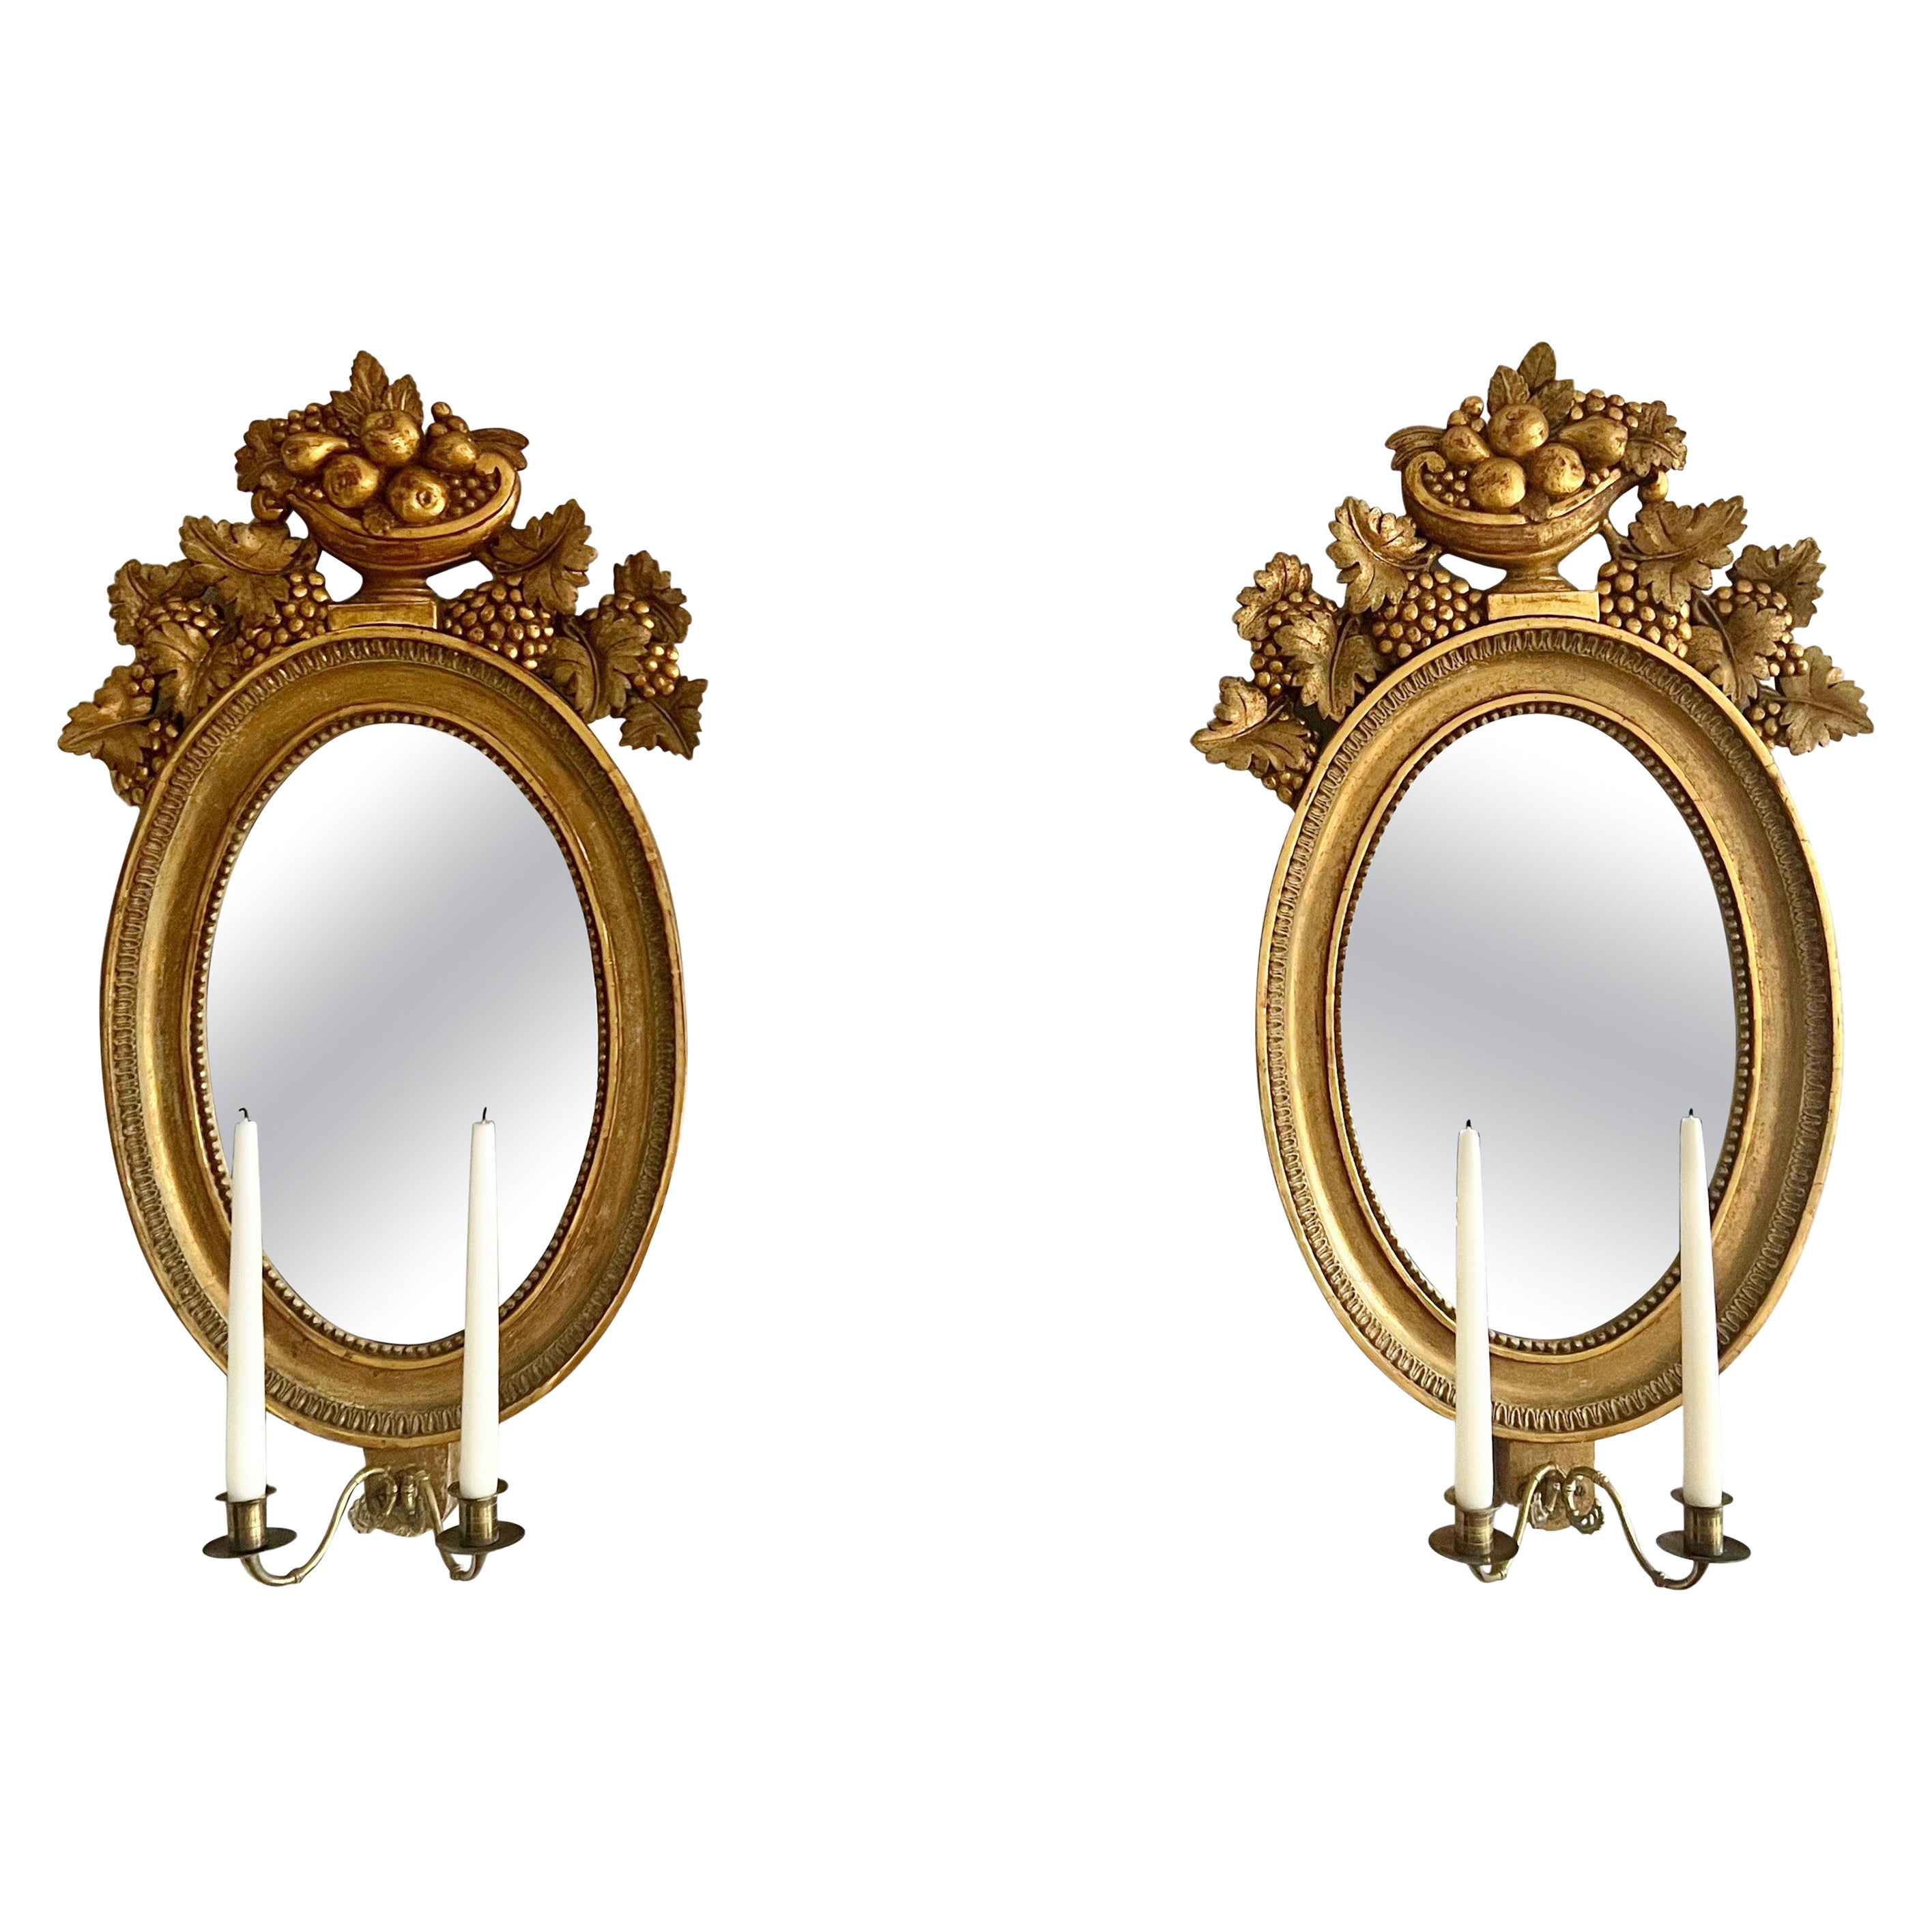 Pair of 19th Century Swedish Girandole Mirrors In Carved Giltwood